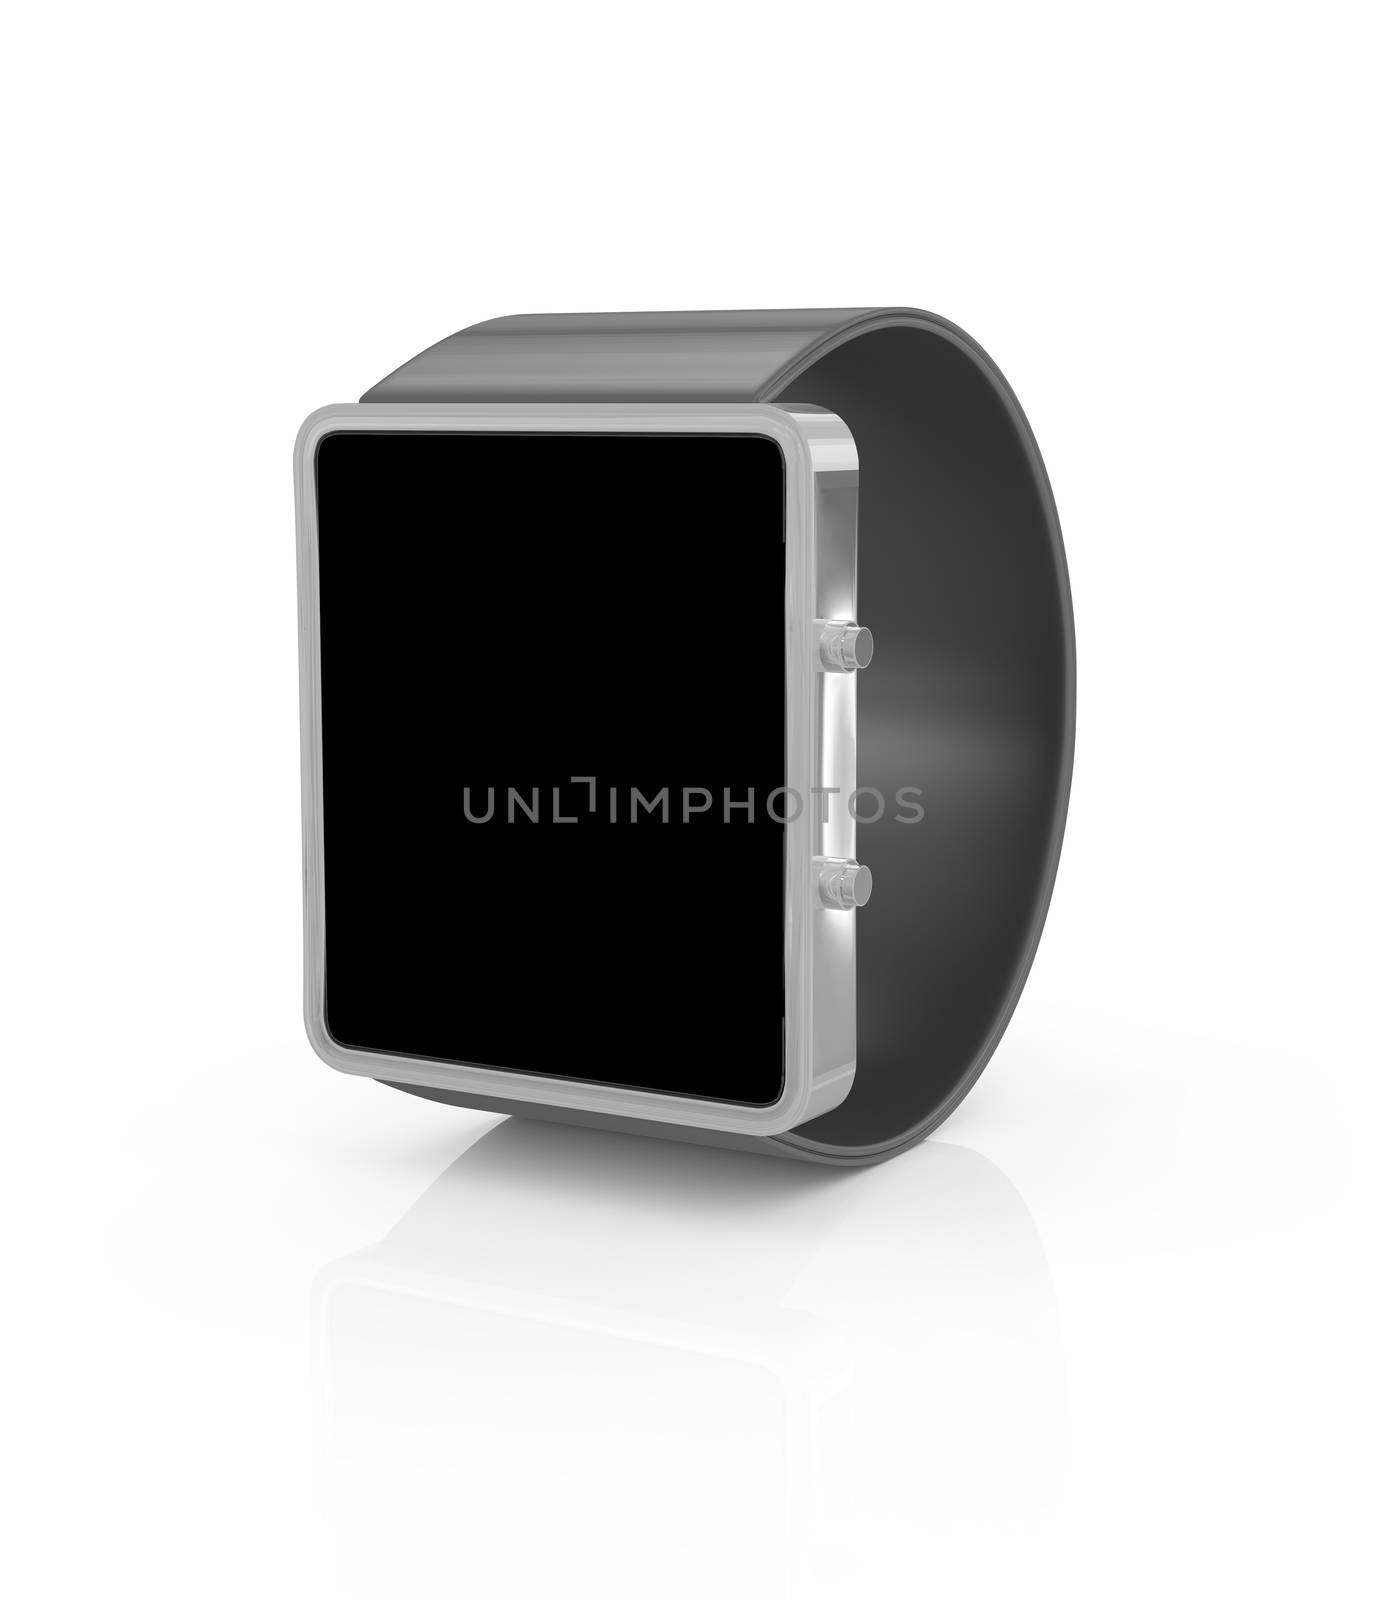 Smartwatch in perspective with black screen by cherezoff